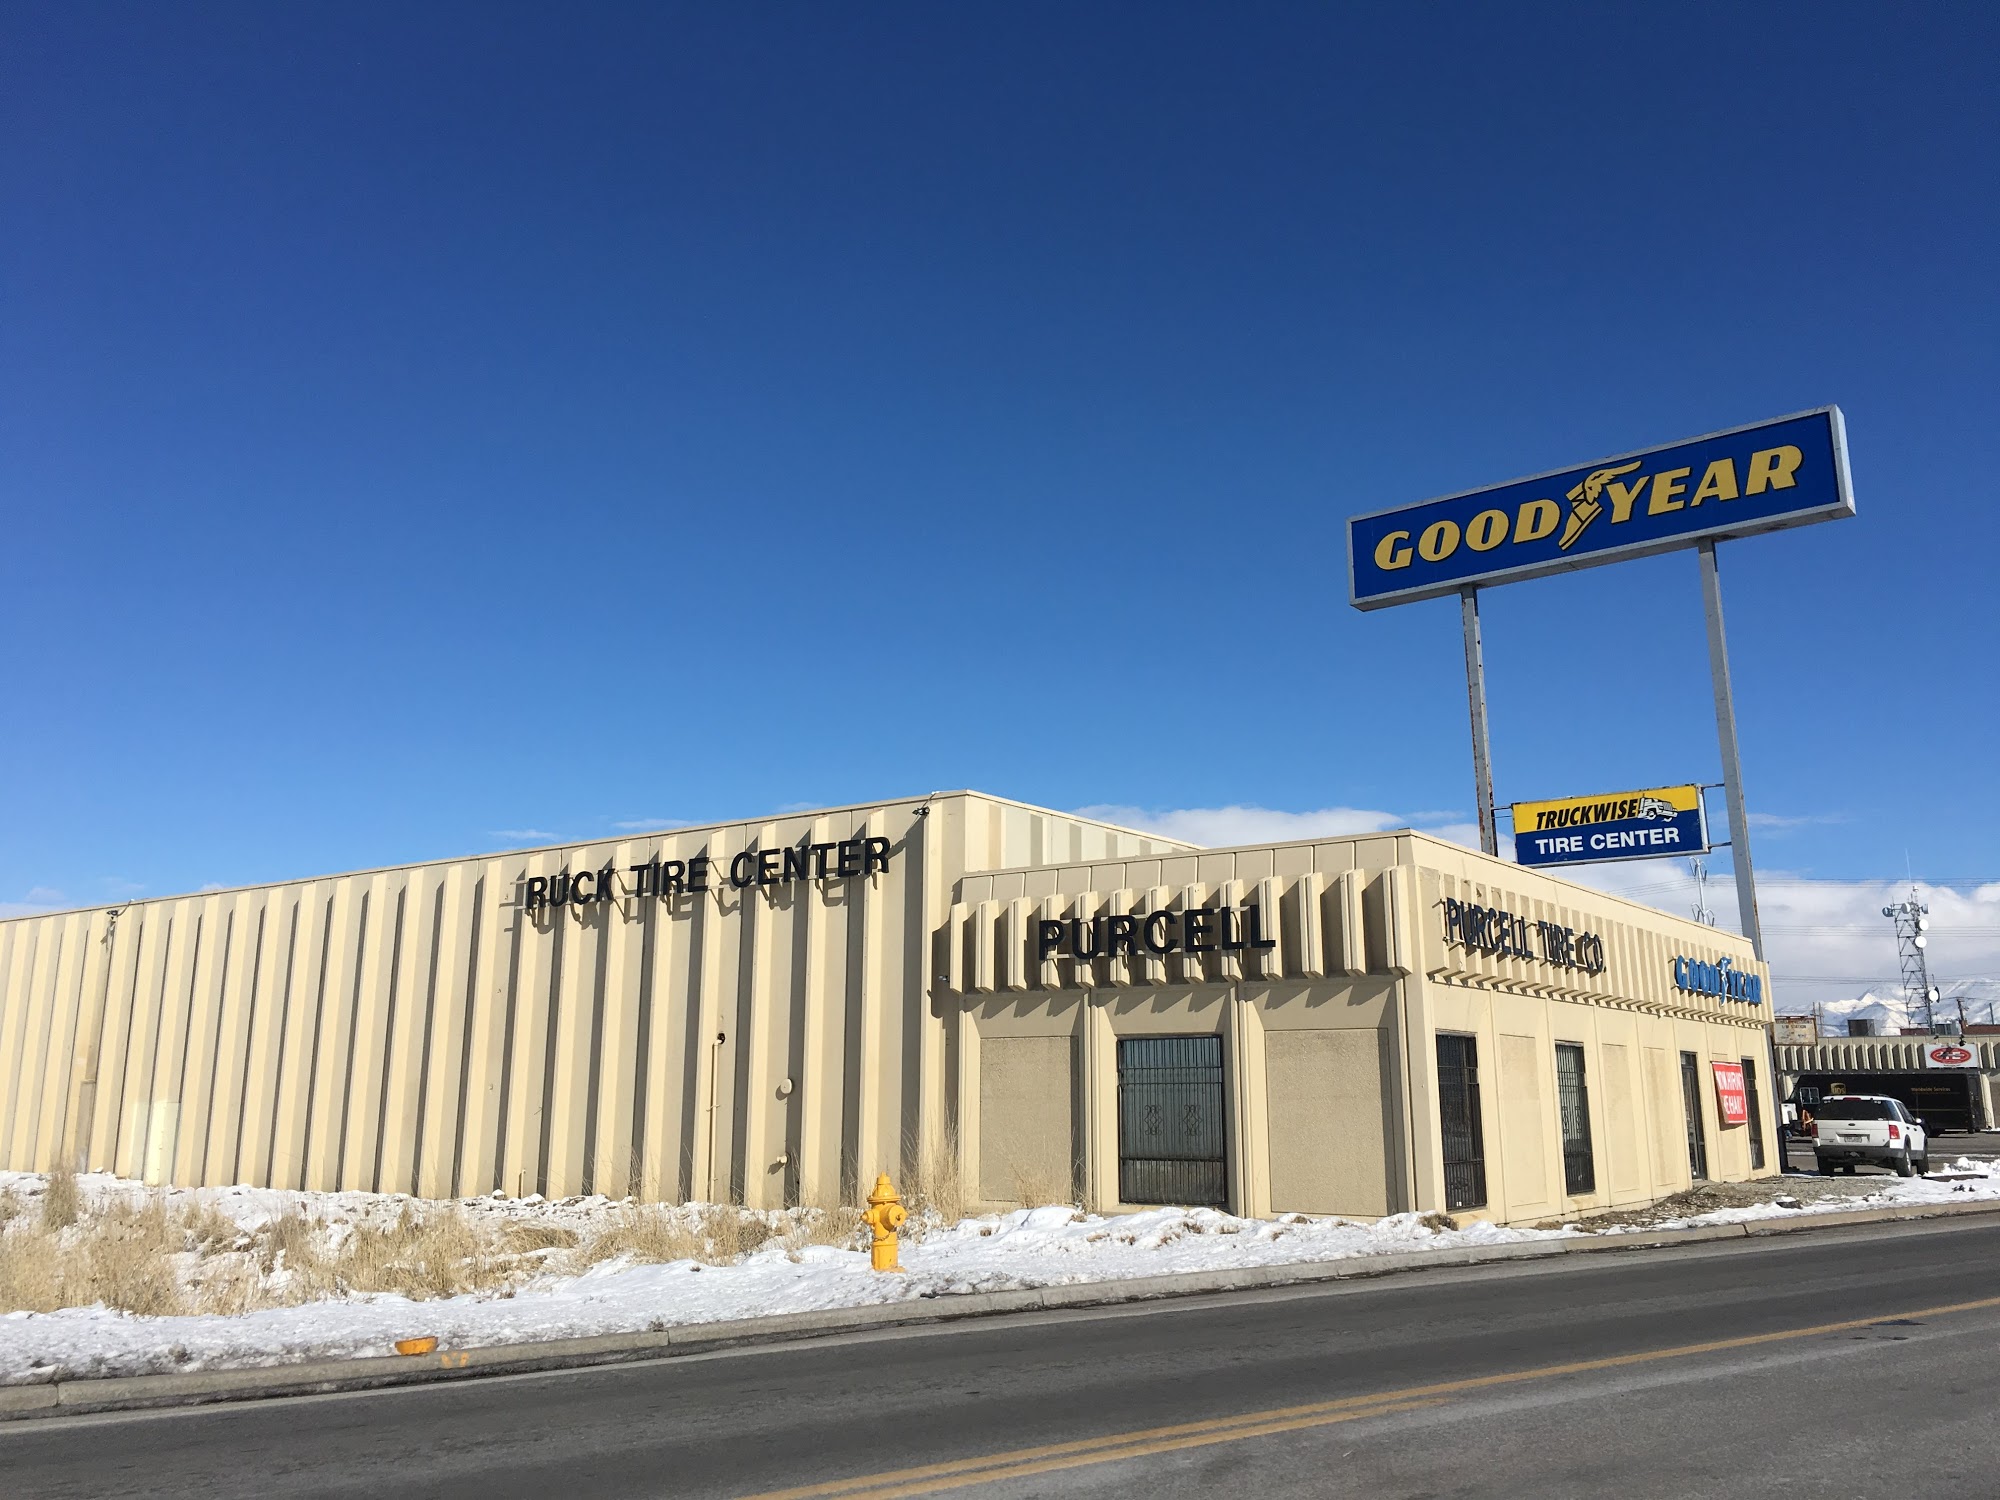 Purcell Tire and Service Centers